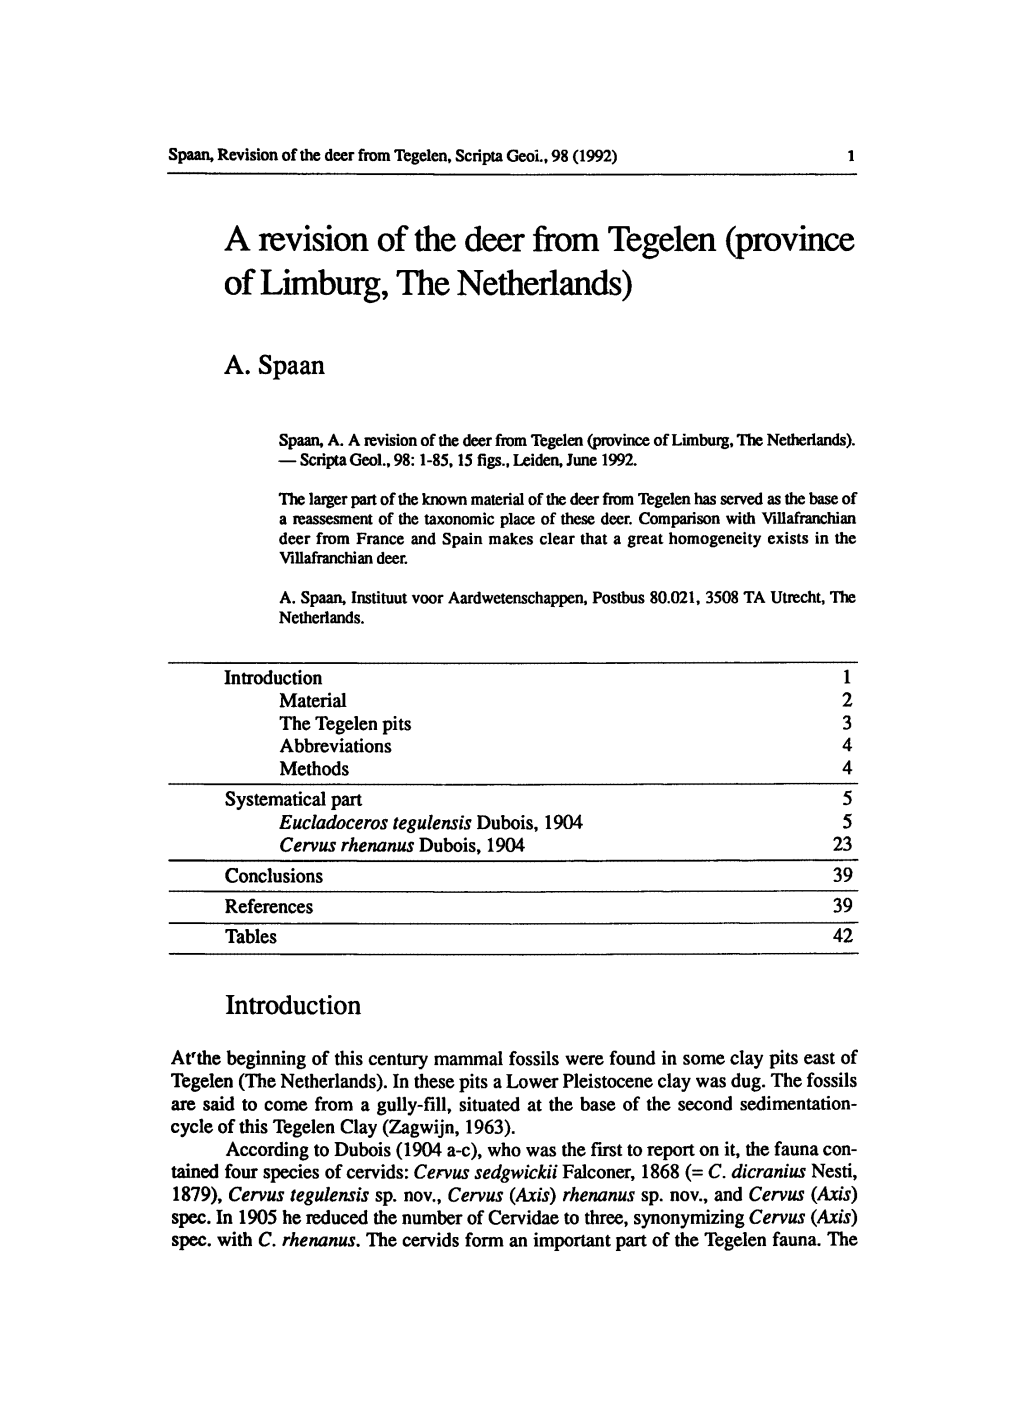 A Revision of the Deer from Tegelen (Province of Limburg, the Netherlands)